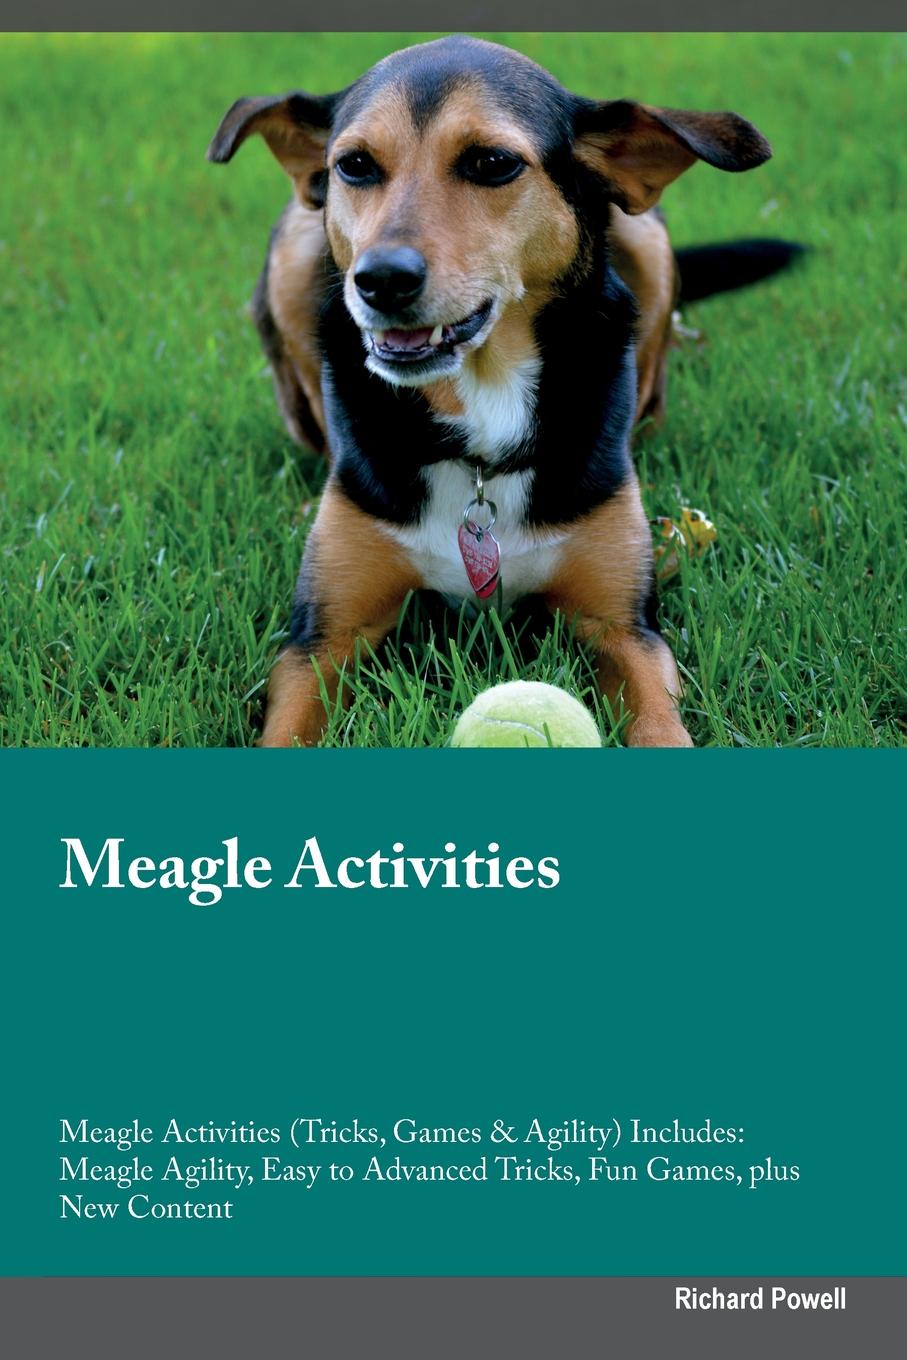 Meagle Activities Meagle Activities (Tricks, Games & Agility) Includes. Meagle Agility, Easy to Advanced Tricks, Fun Games, plus New Content